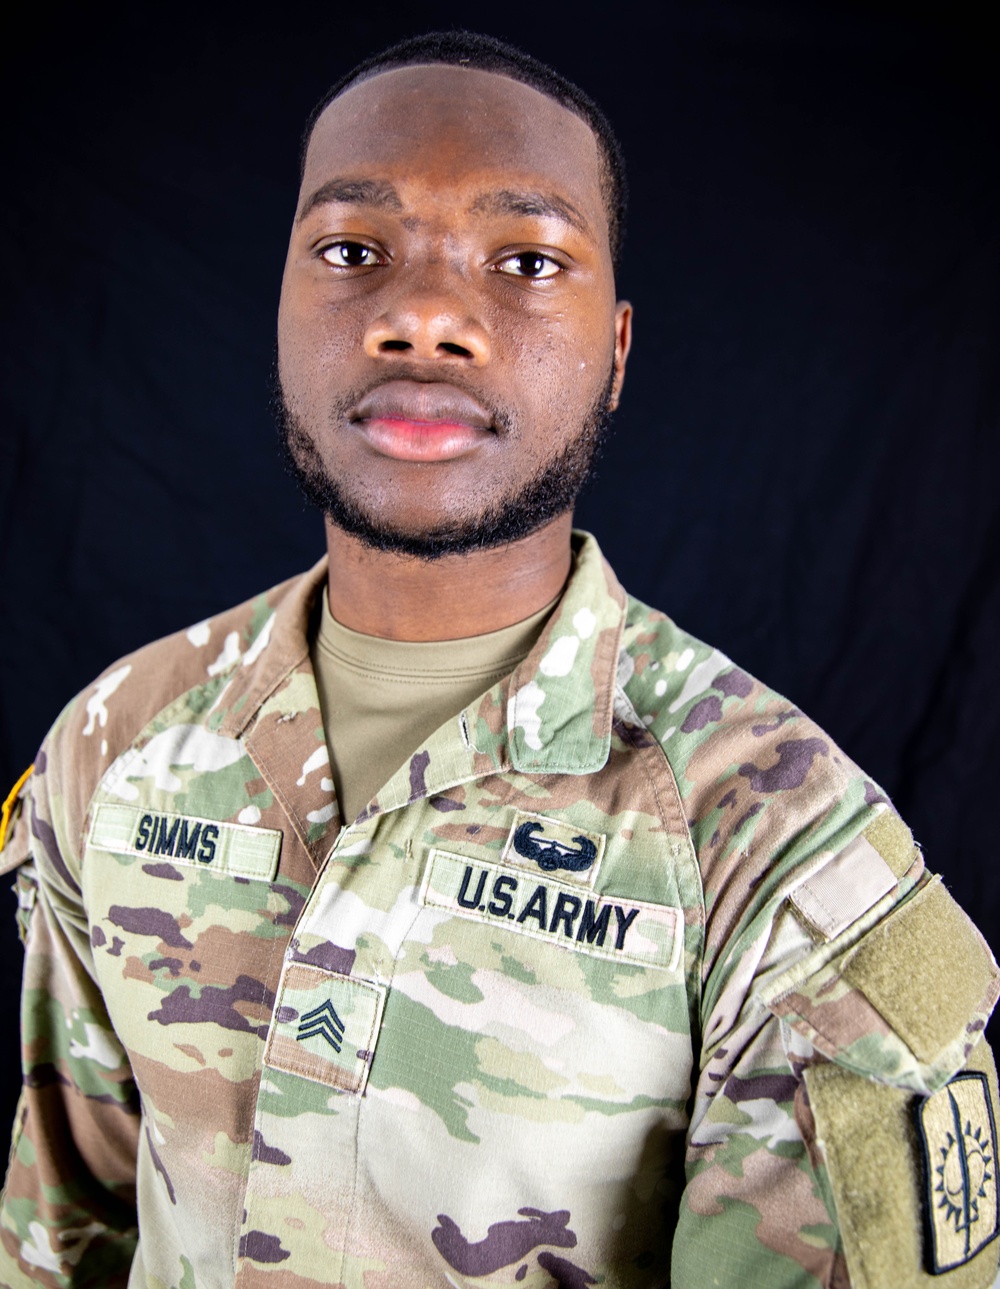 From Jamaica to the U.S. Army